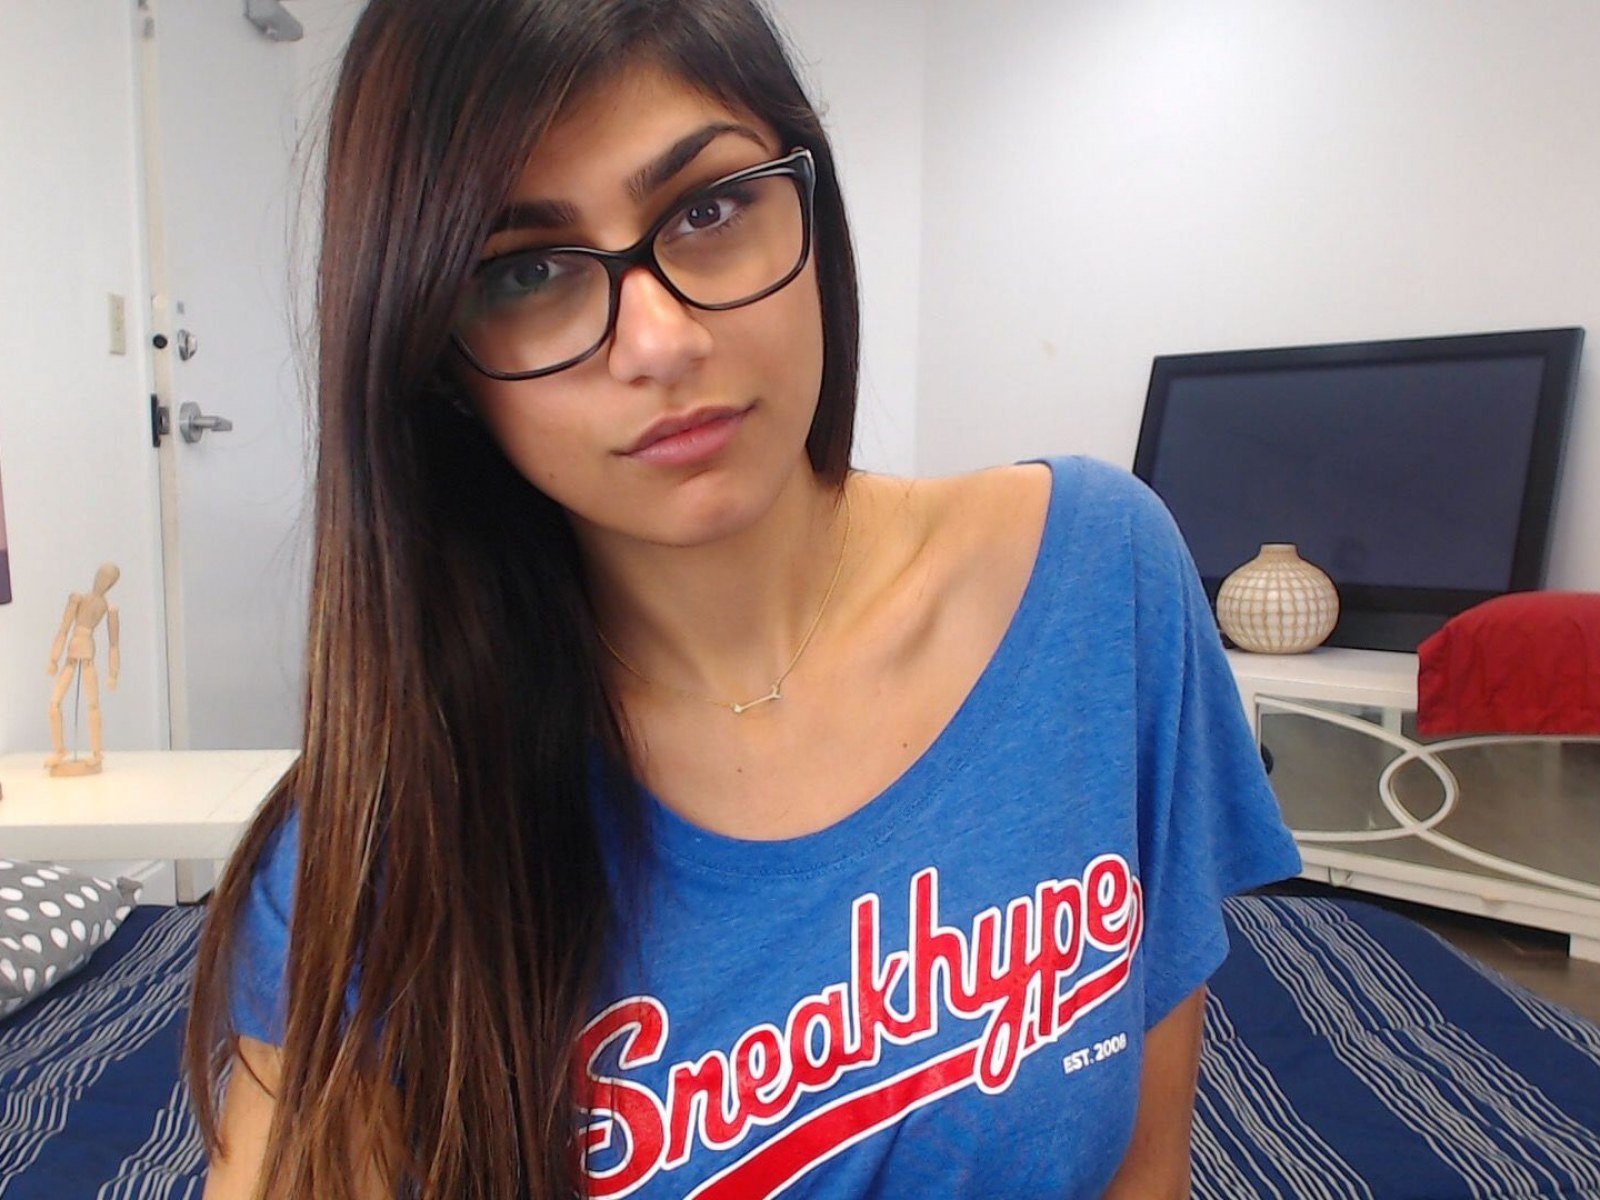 If you're looking to see someone who uses their net worth for good, look no further than Mia Khalifa. Her philanthropy work is excellent.